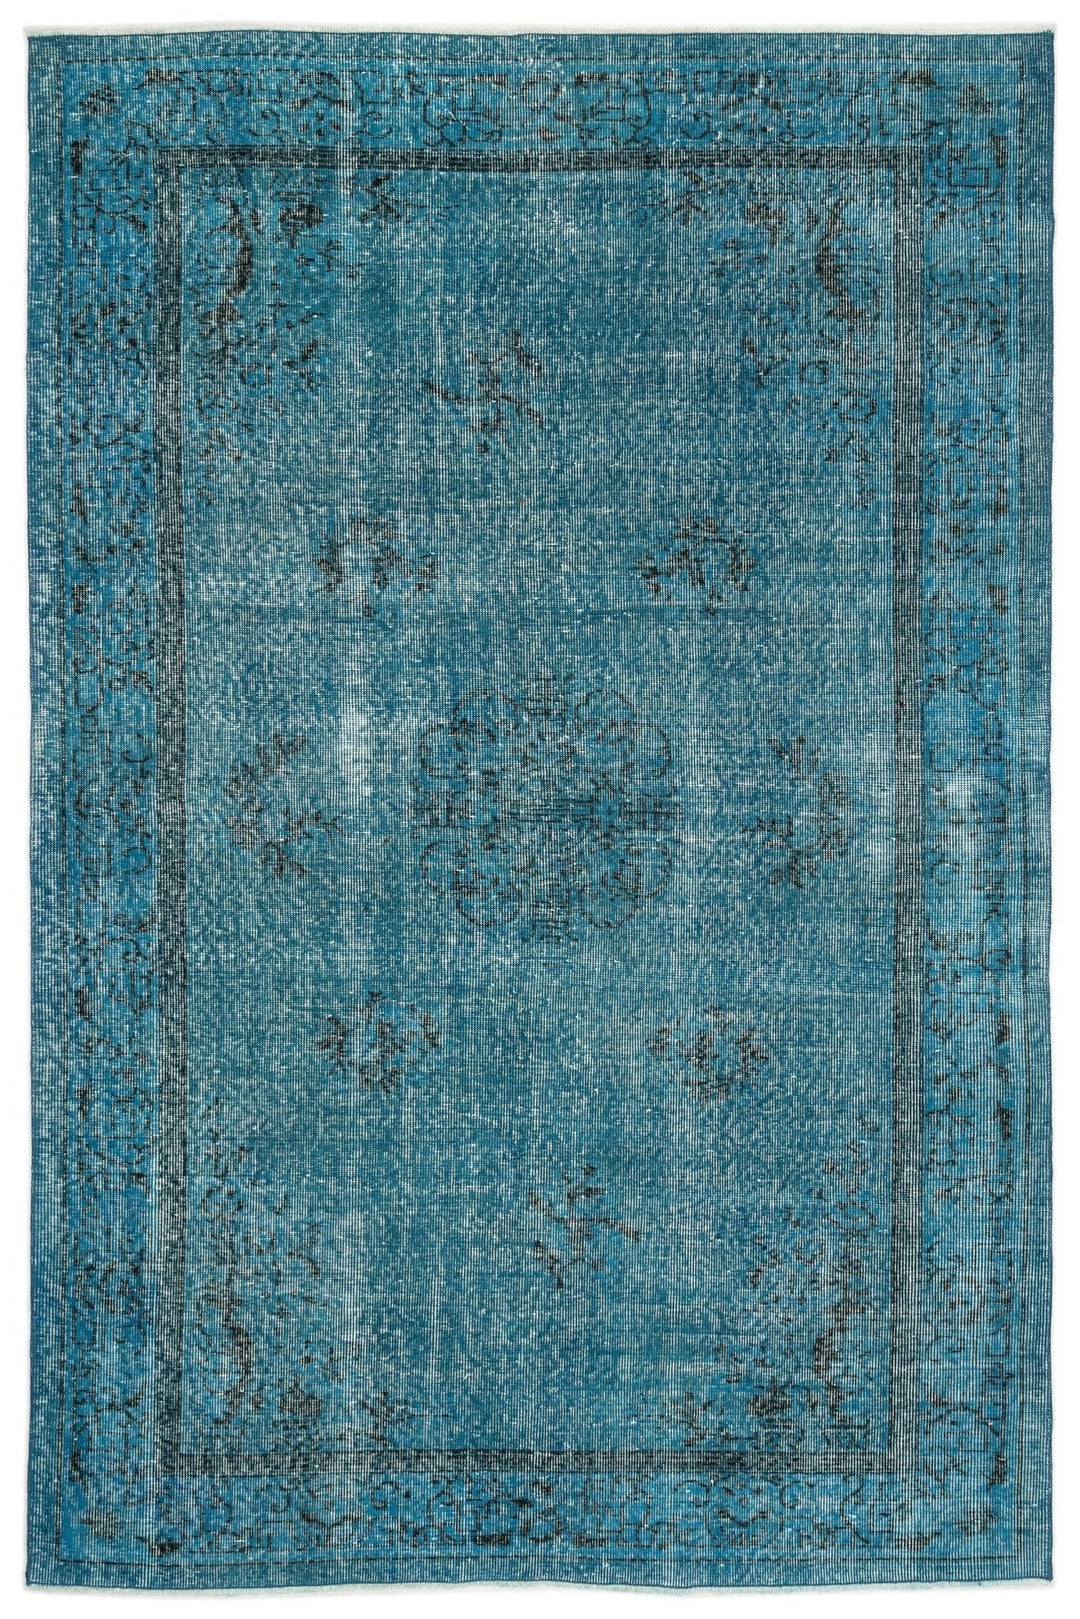 Athens 12638 Turquoise Tumbled Wool Hand Woven Carpet 167 x 253